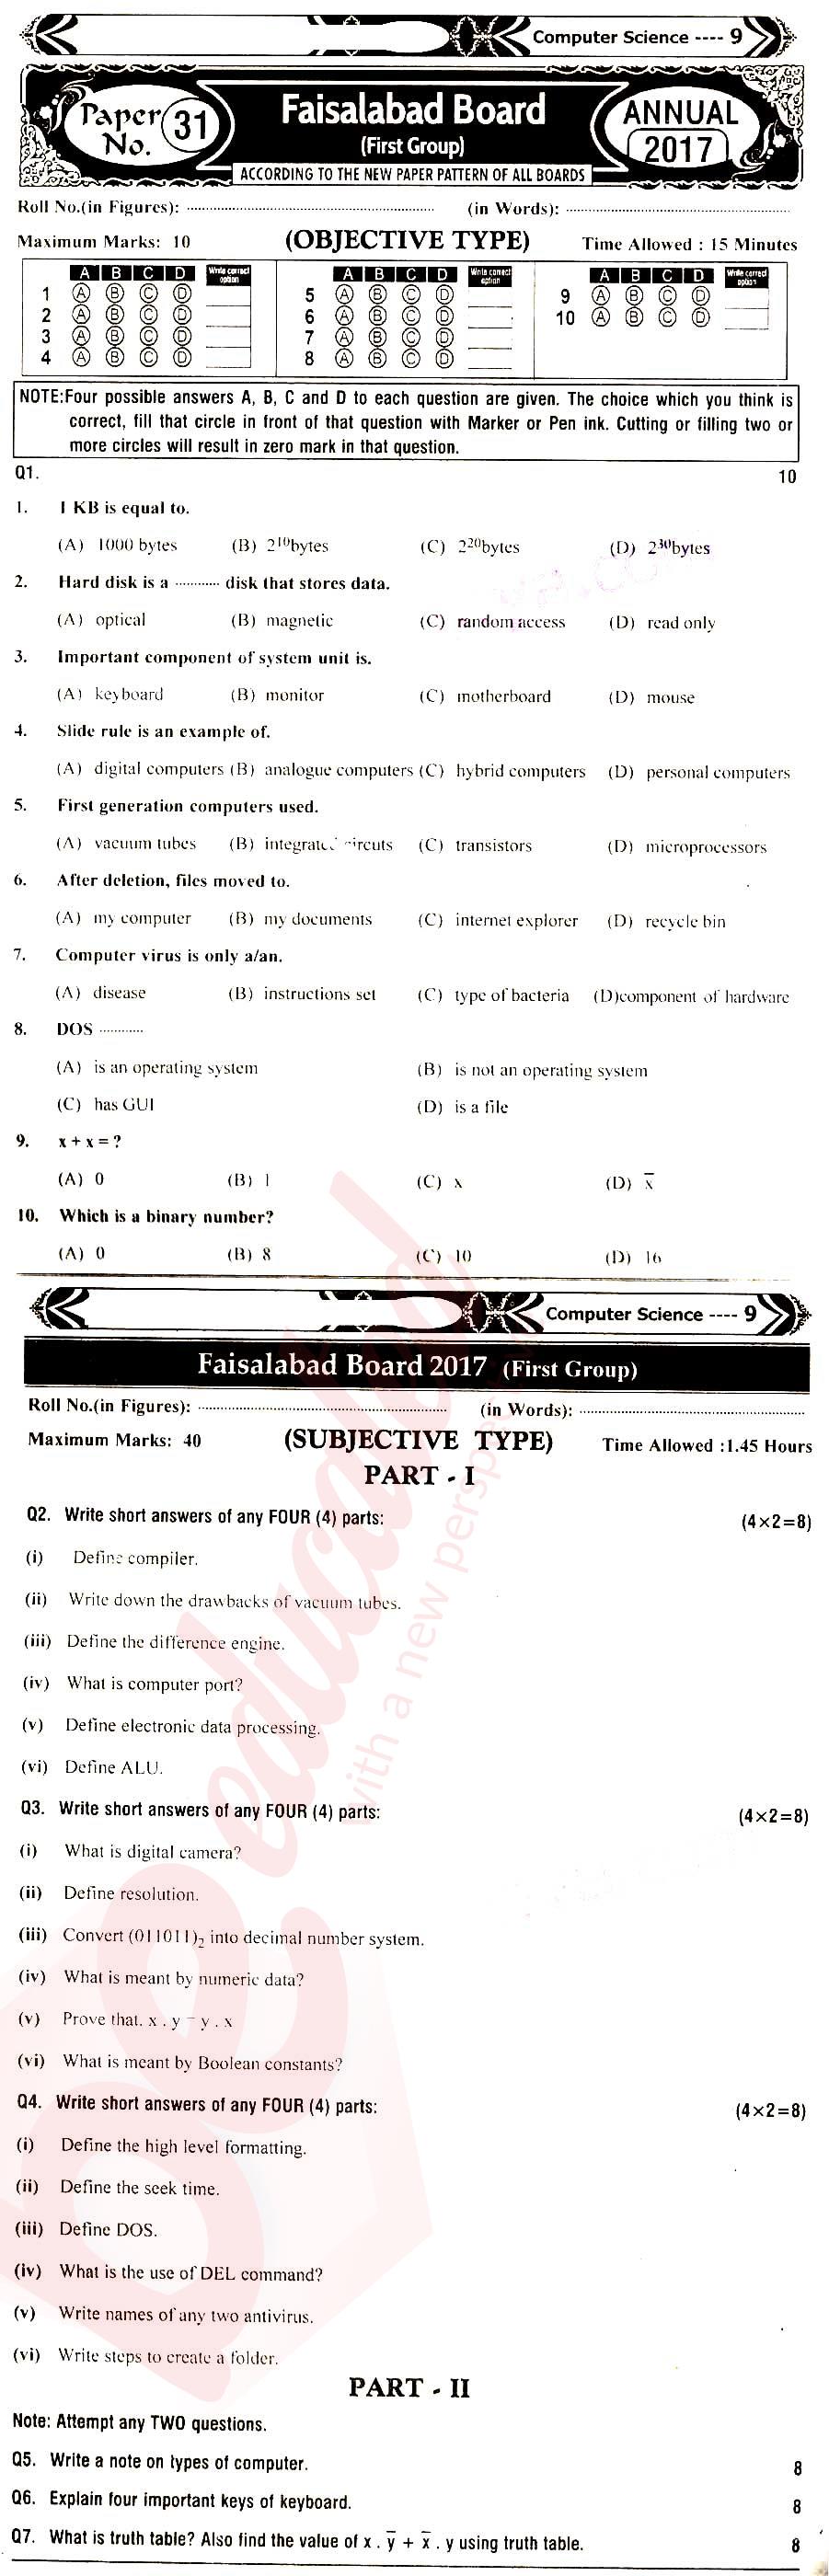 Computer Science 9th English Medium Past Paper Group 1 BISE Faisalabad 2016